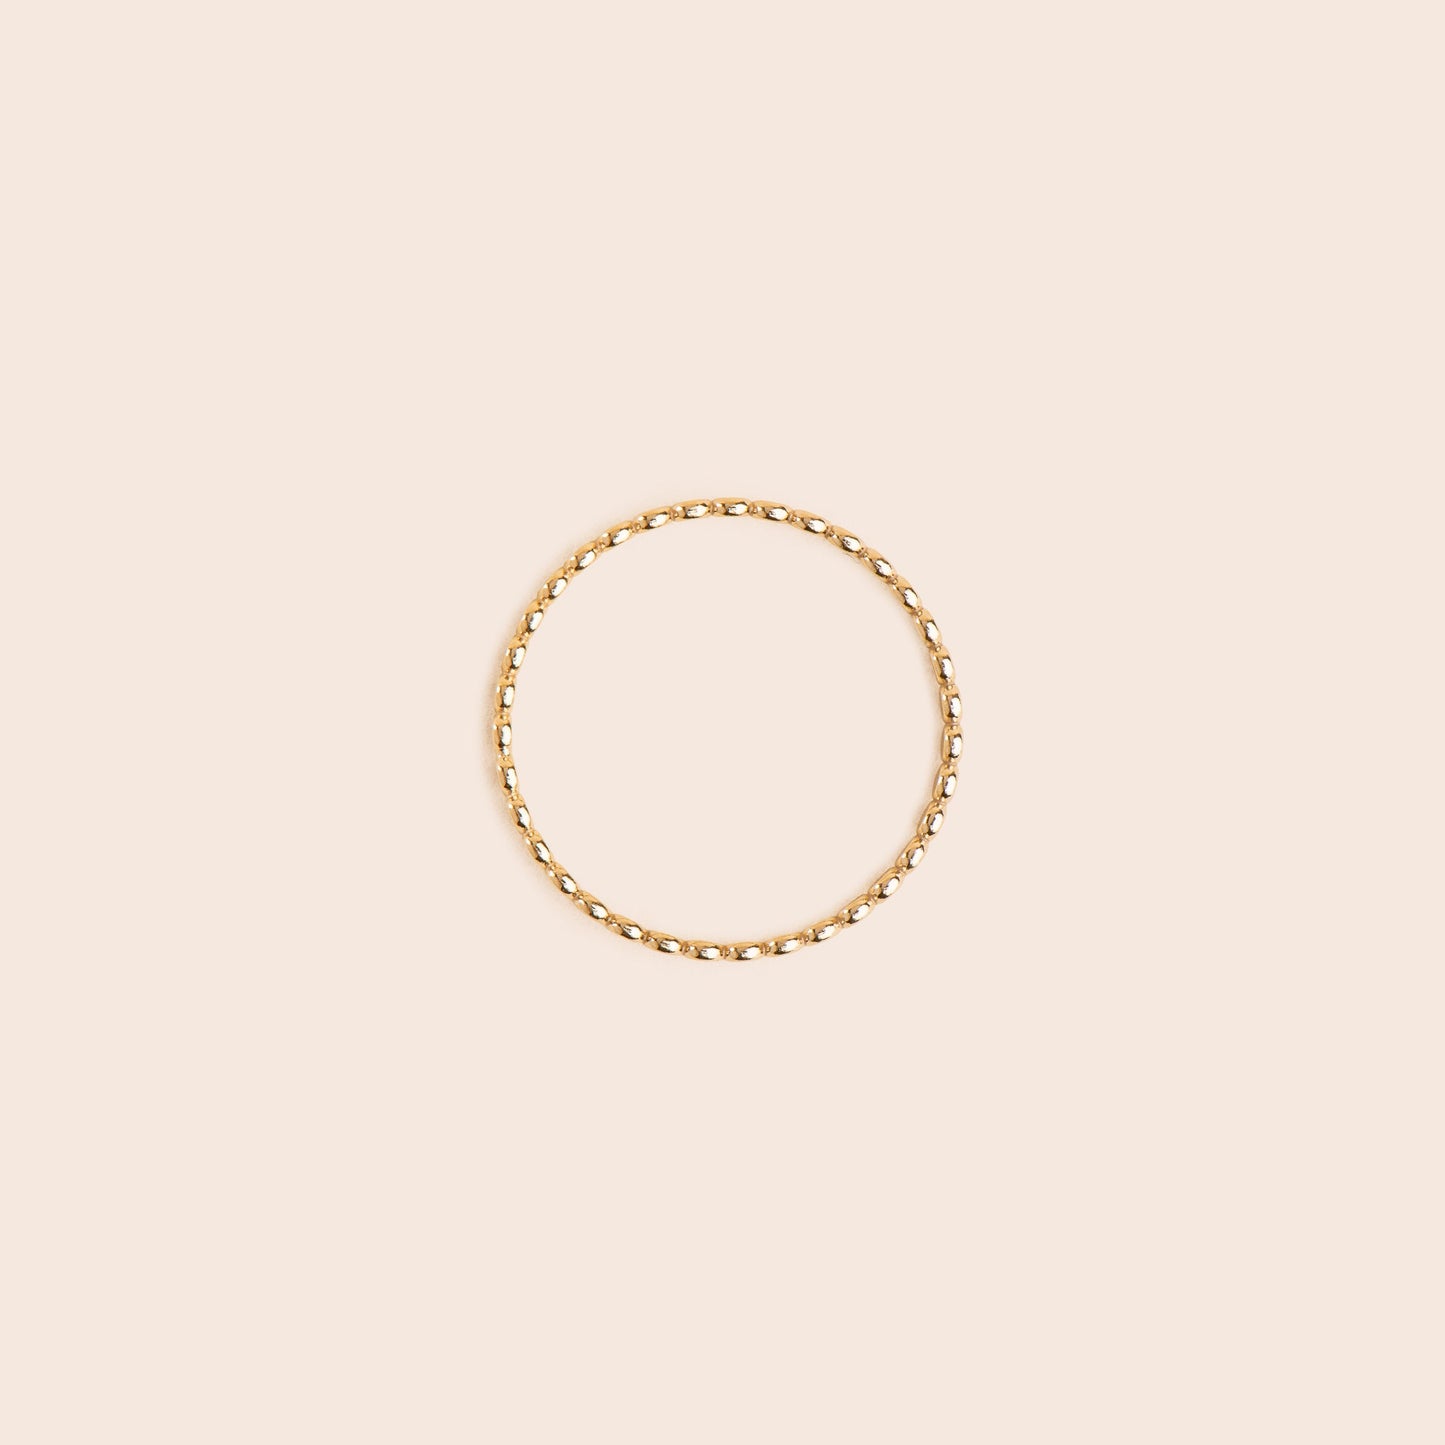 Load image into Gallery viewer, Dainty Dots - Gold Filled Stacking Ring - Gemlet
